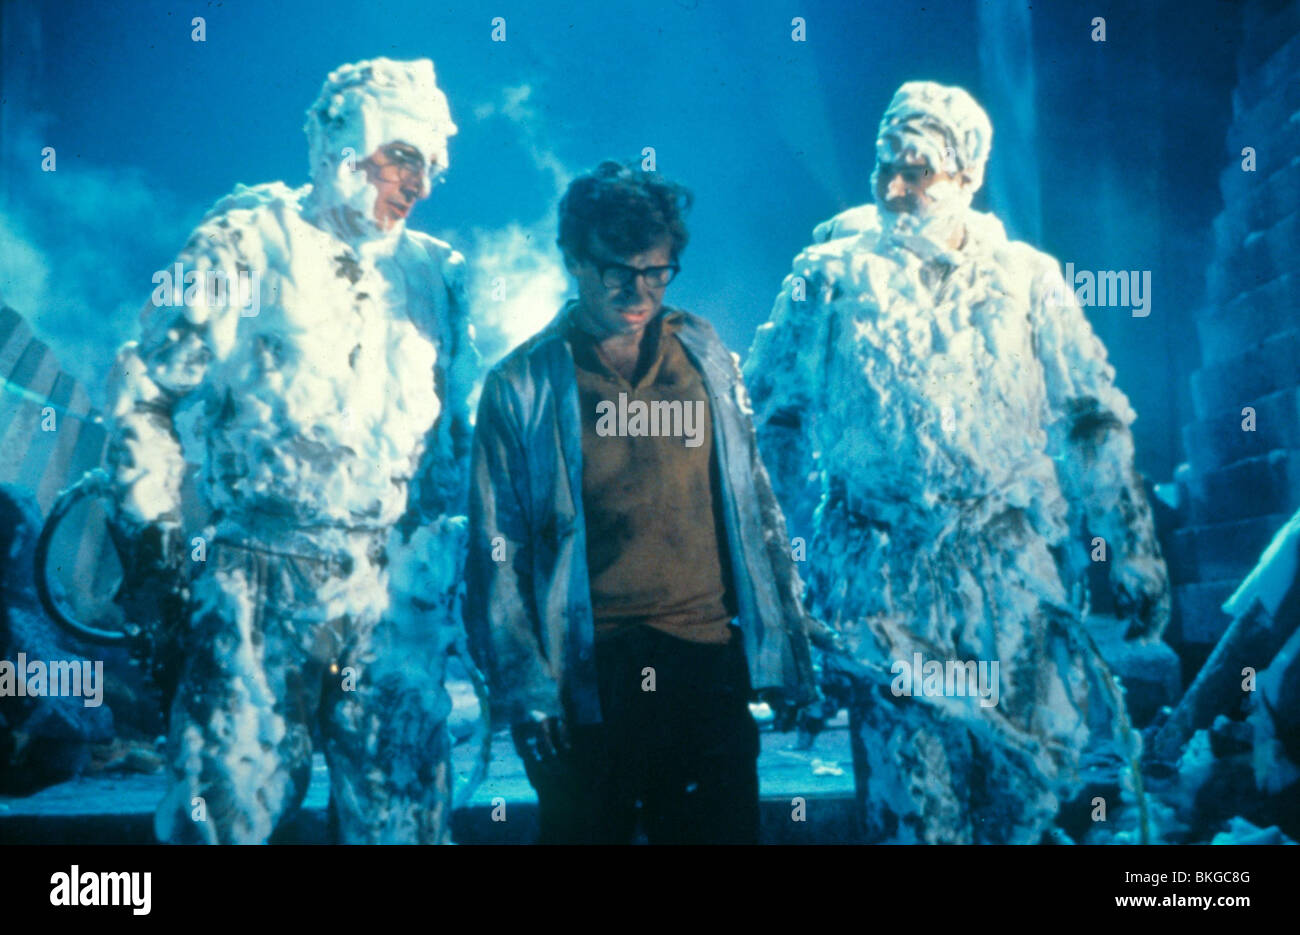 Ghostbusters 1984 Stock Photos & Ghostbusters 1984 Stock Images - Alamy1300 x 934